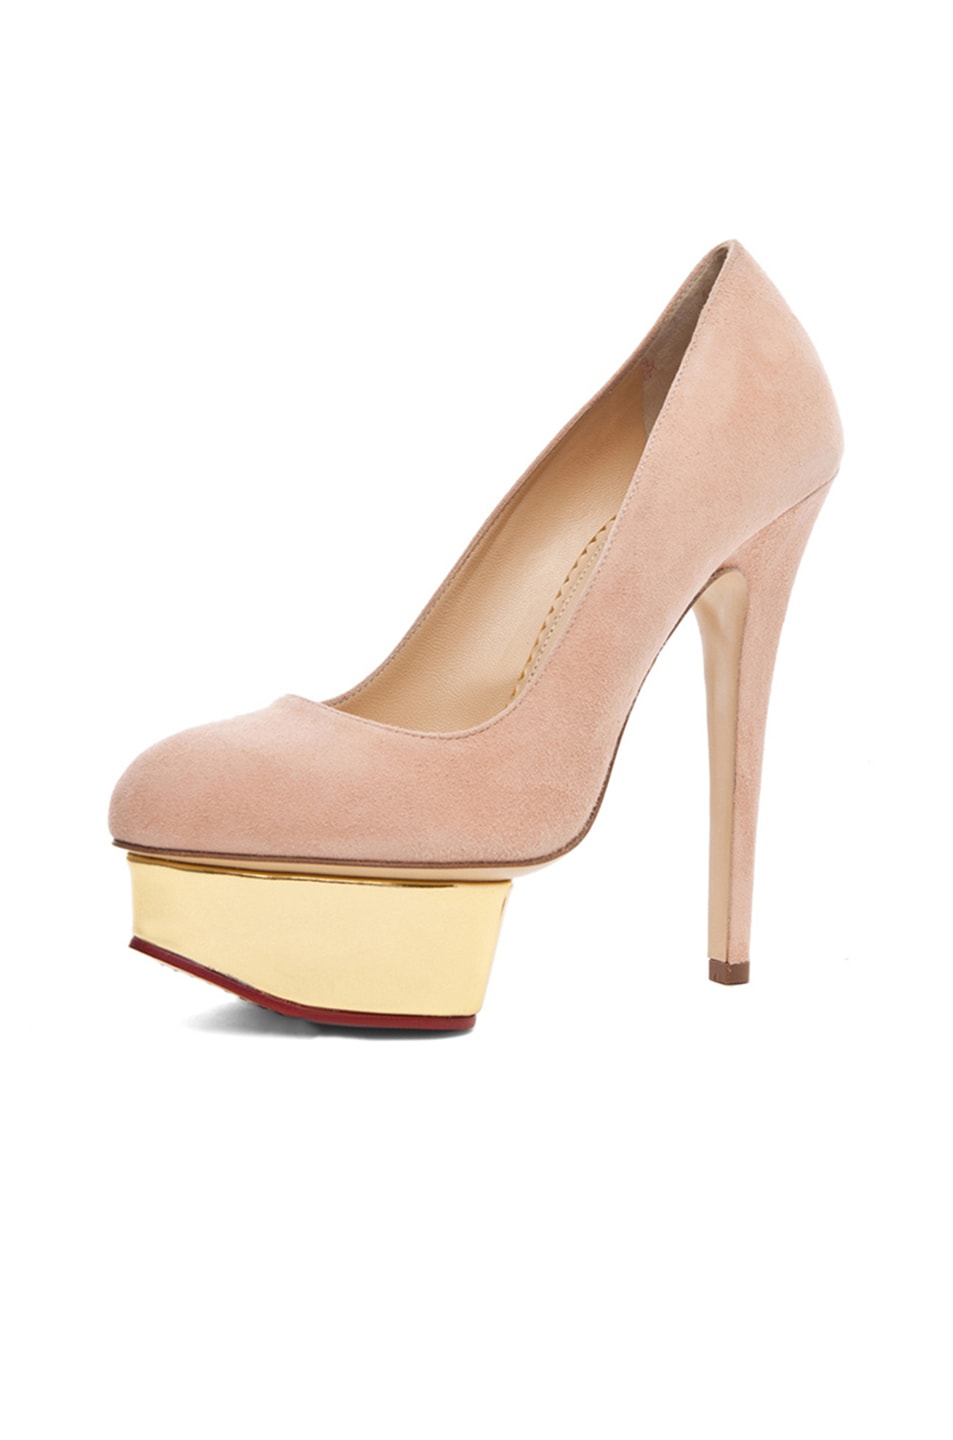 CHARLOTTE OLYMPIA Dolly Signature Court Island Suede Pumps in Blush